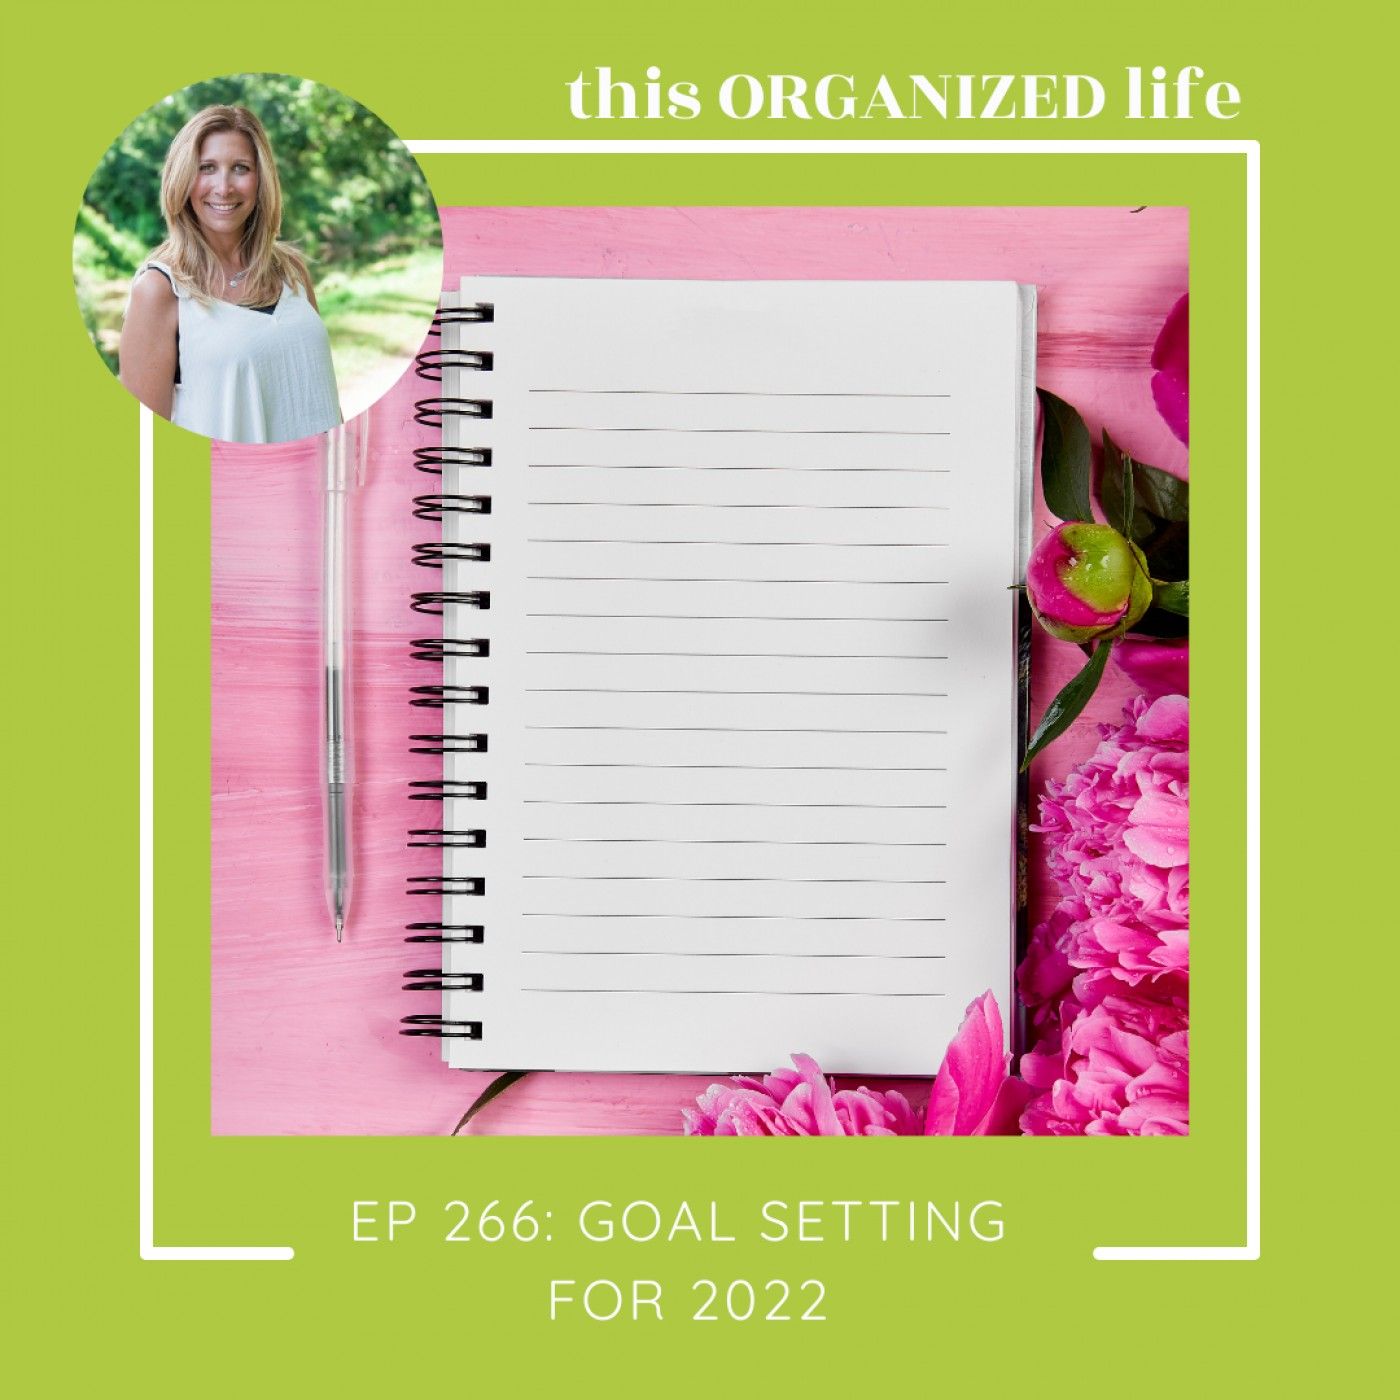 ep 266: 4 Steps to Goal Setting in 2022